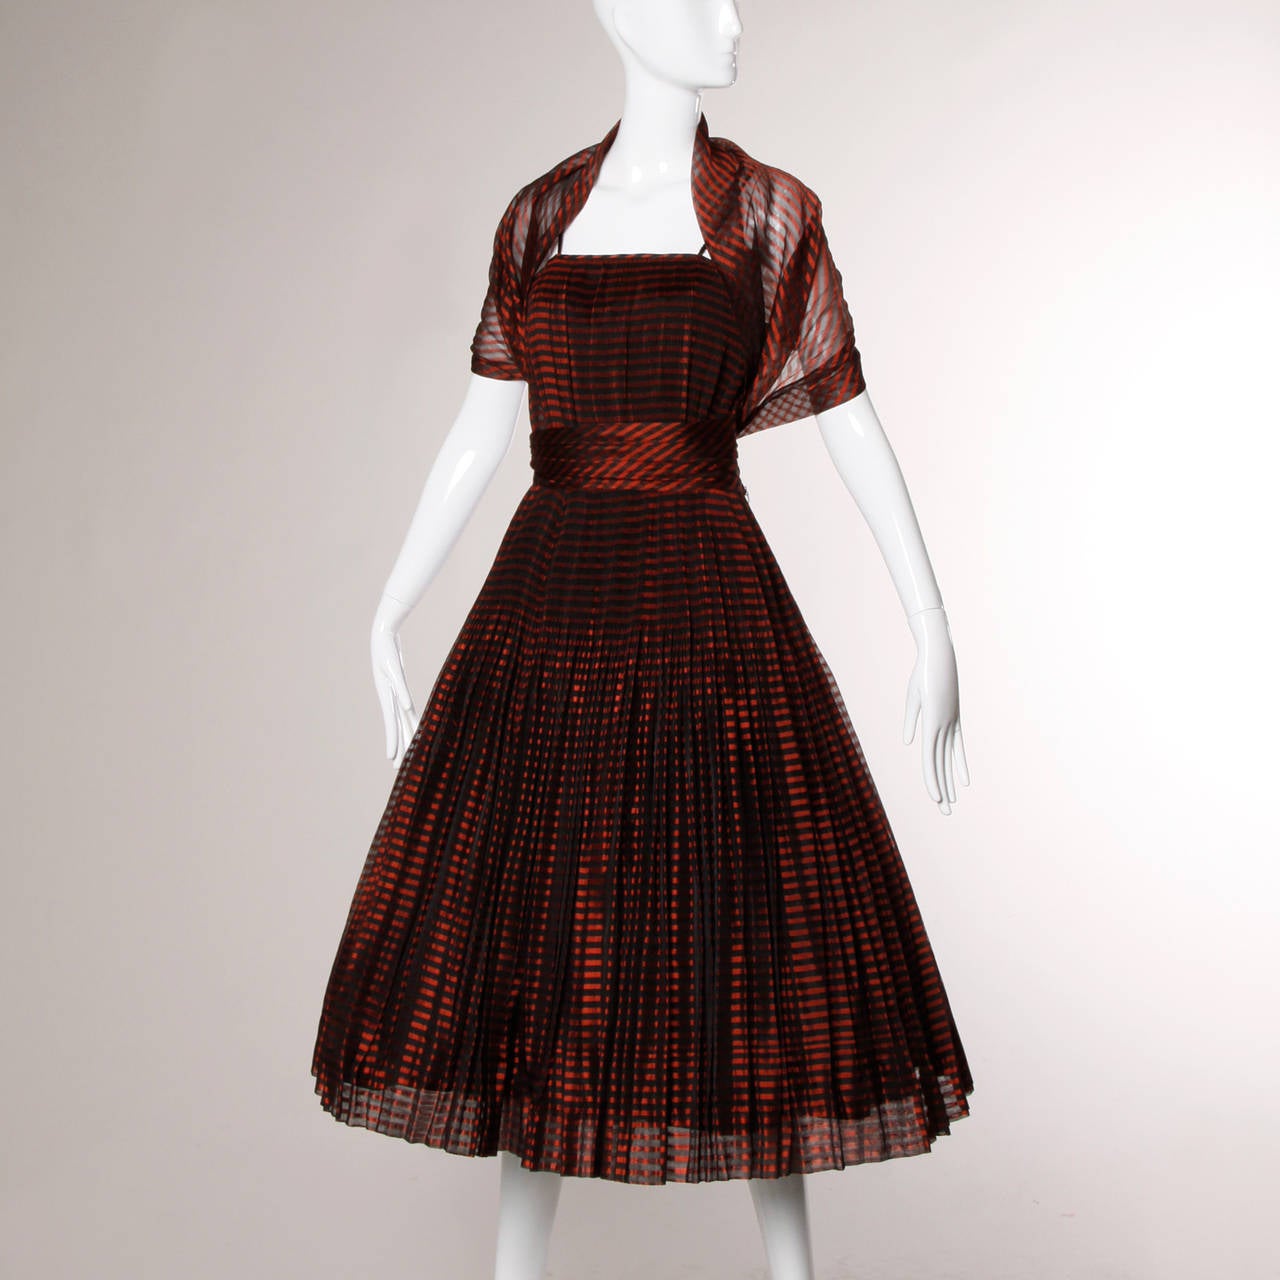 Phenomenal two-piece set from the 1940s featuring a wrap/ stole and a strapless dress with crystal pleats (so much fabric!). Sheer metallic red and black striped fabric on both pieces. The dress is fully lined and has side metal zip and hook